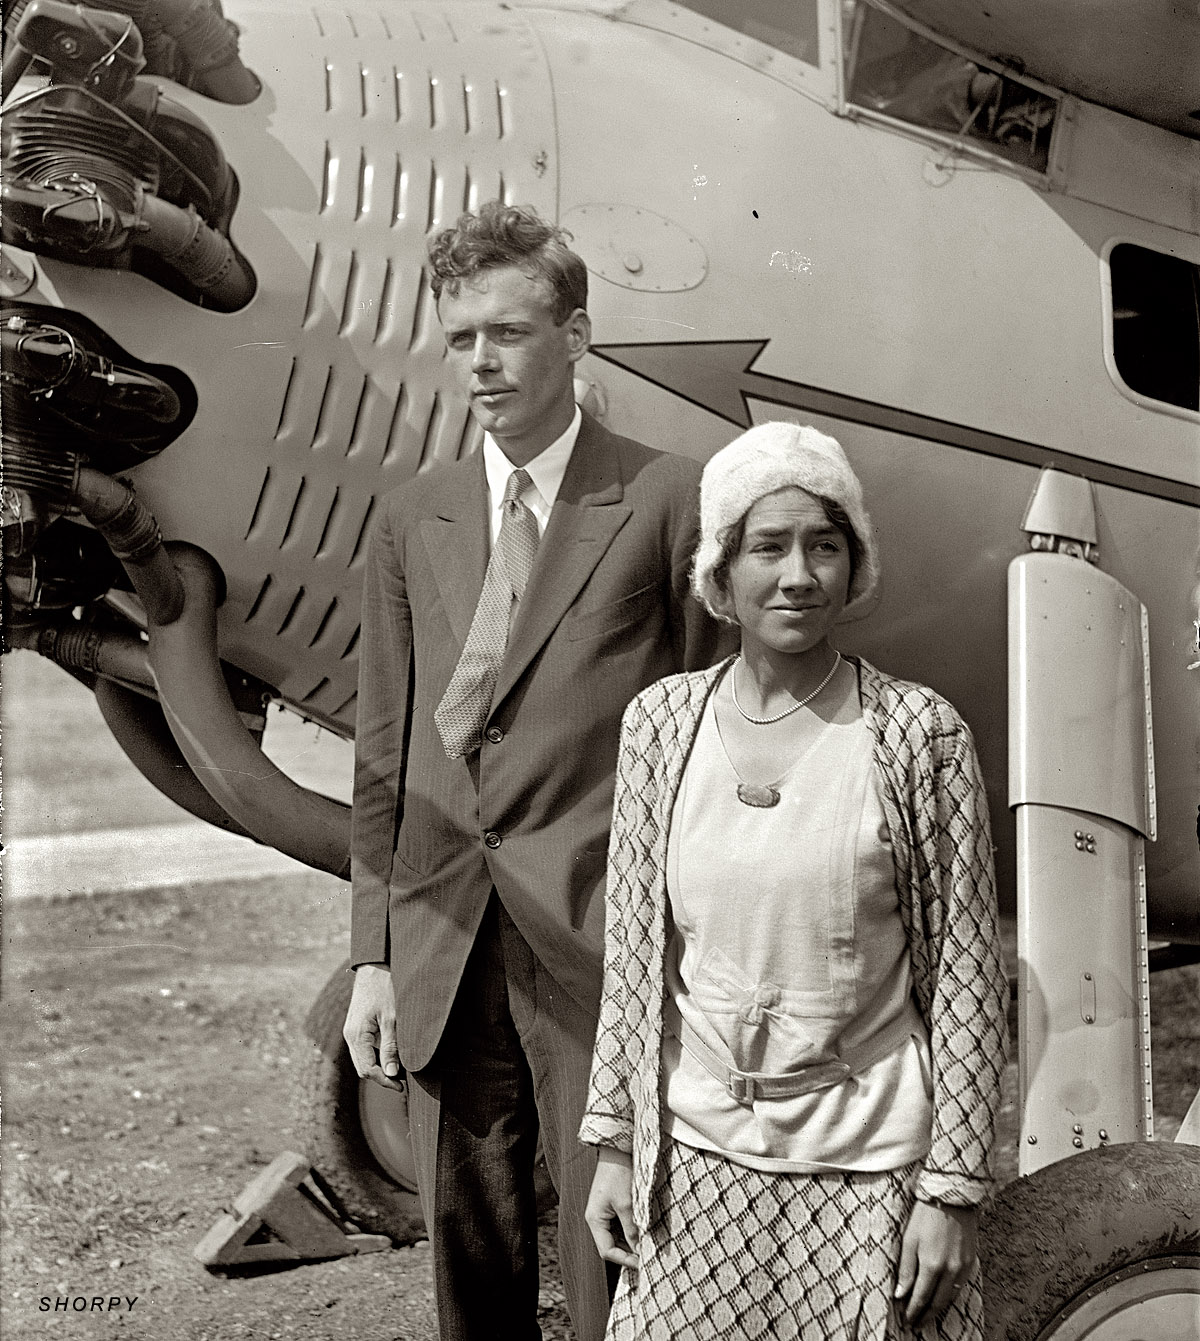 September 18, 1929. "Lindbergh & wife." Charles and Anne Morrow Lindbergh, four months after they married. National Photo glass negative. View full size.